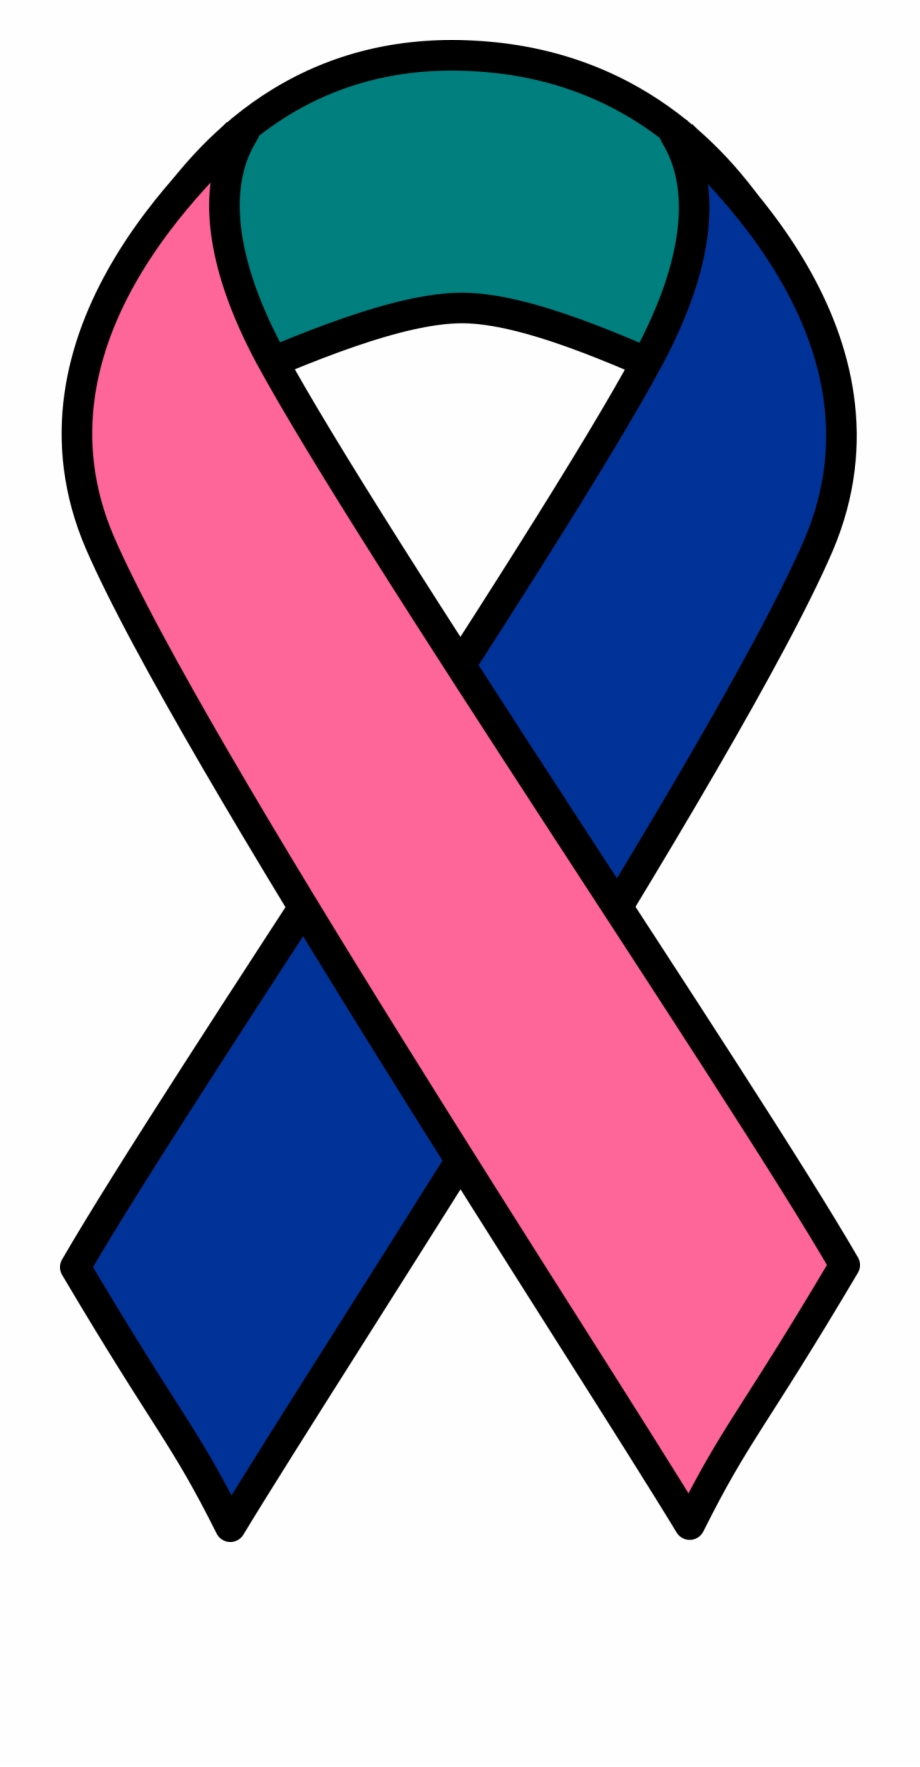 This Free Icons Png Design Of Thyroid Cancer